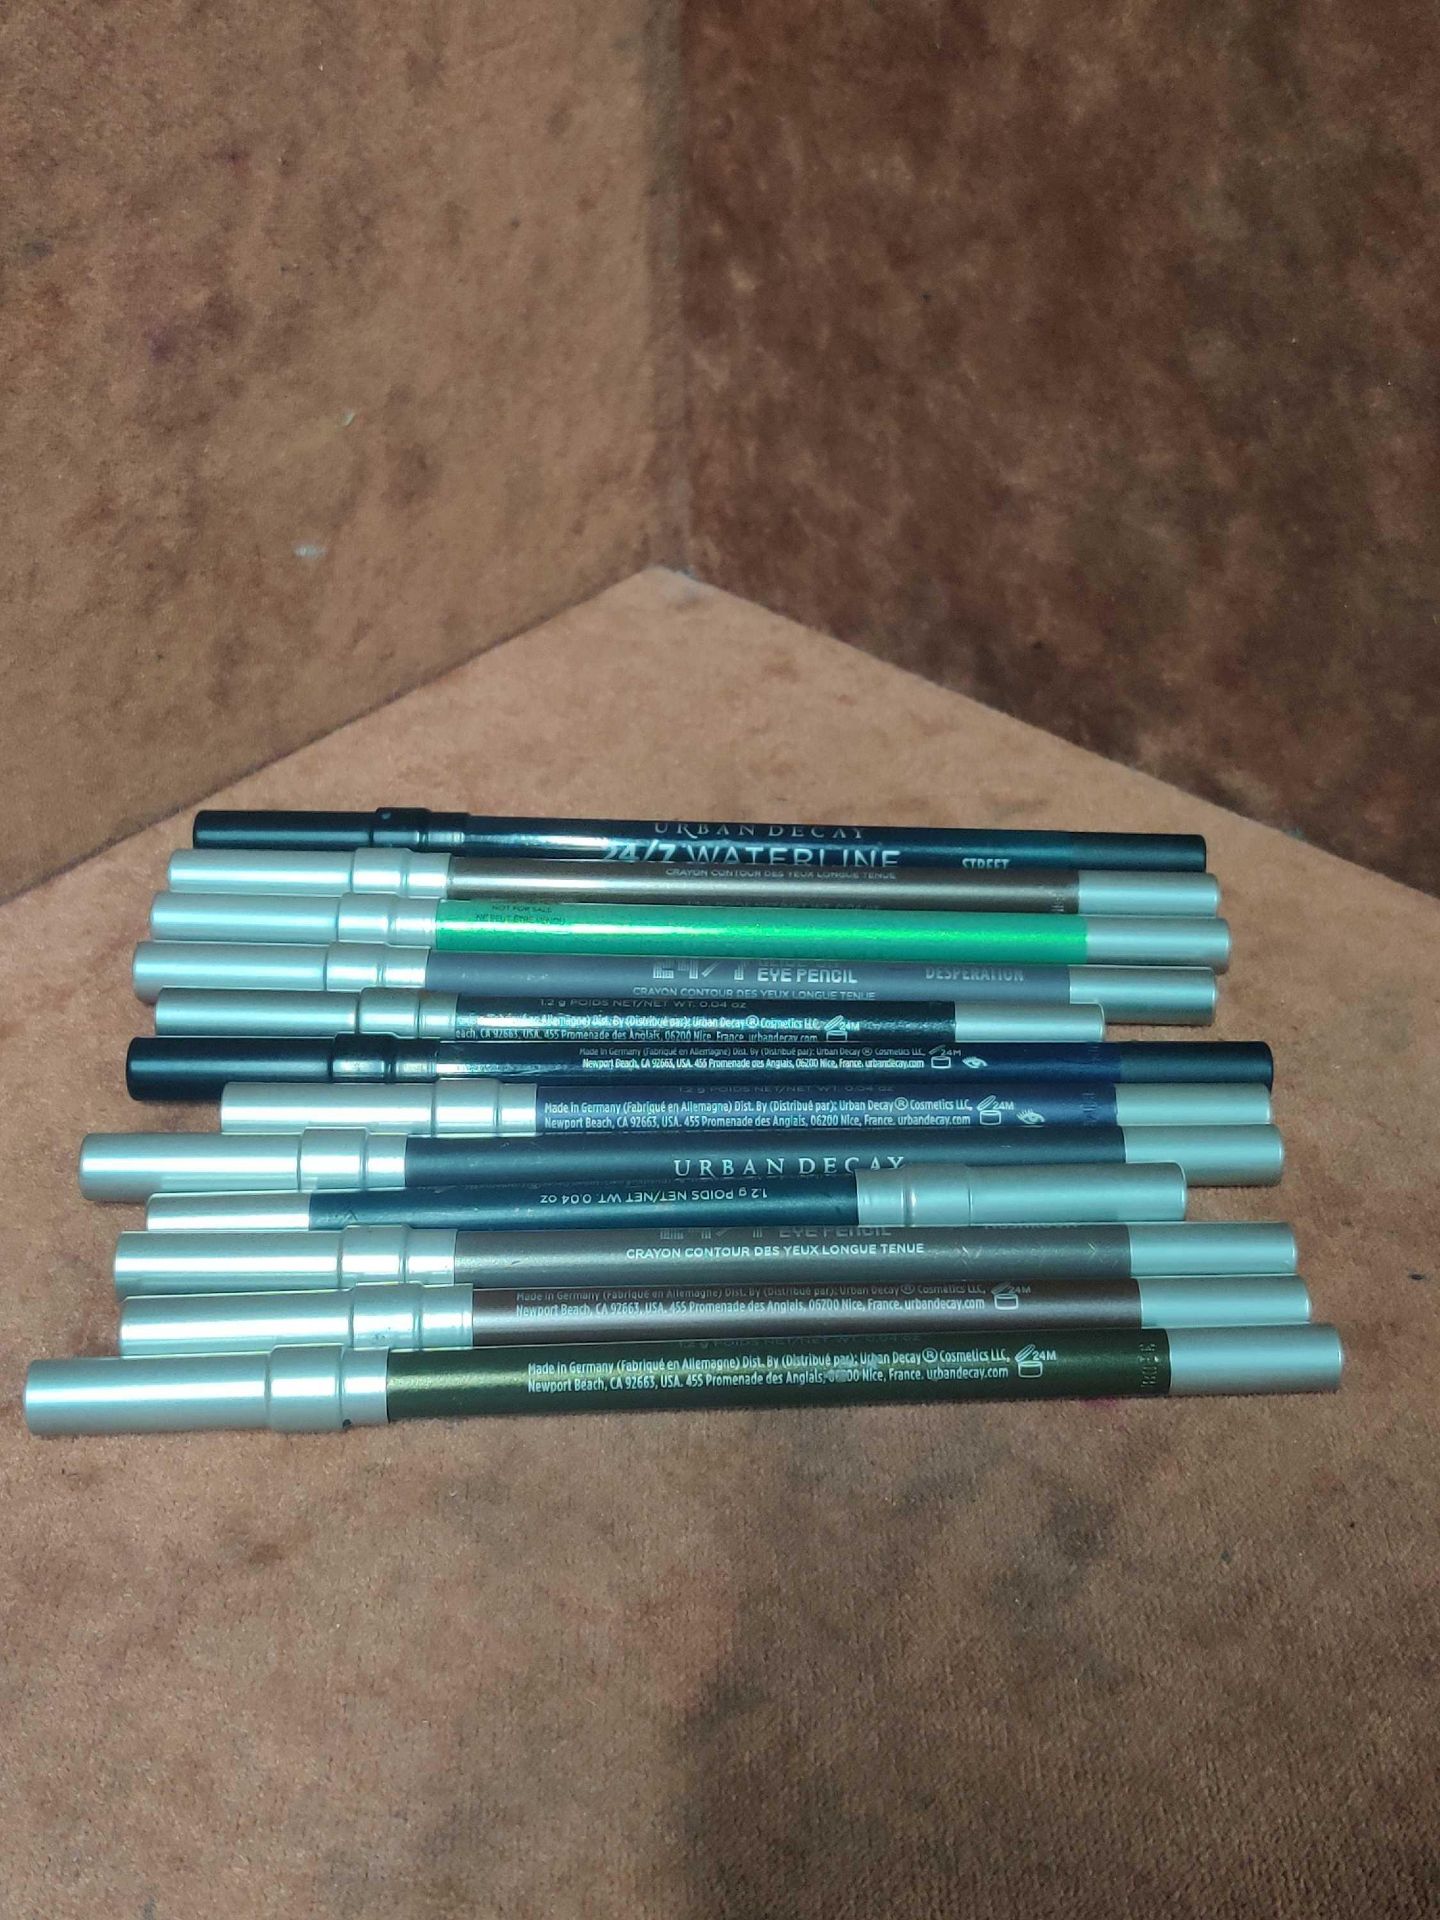 (Jb) RRP £200 Lot To Contain 12 Testers Assorted Premium Urban Decay Makeup Pencils All Ex-Display A